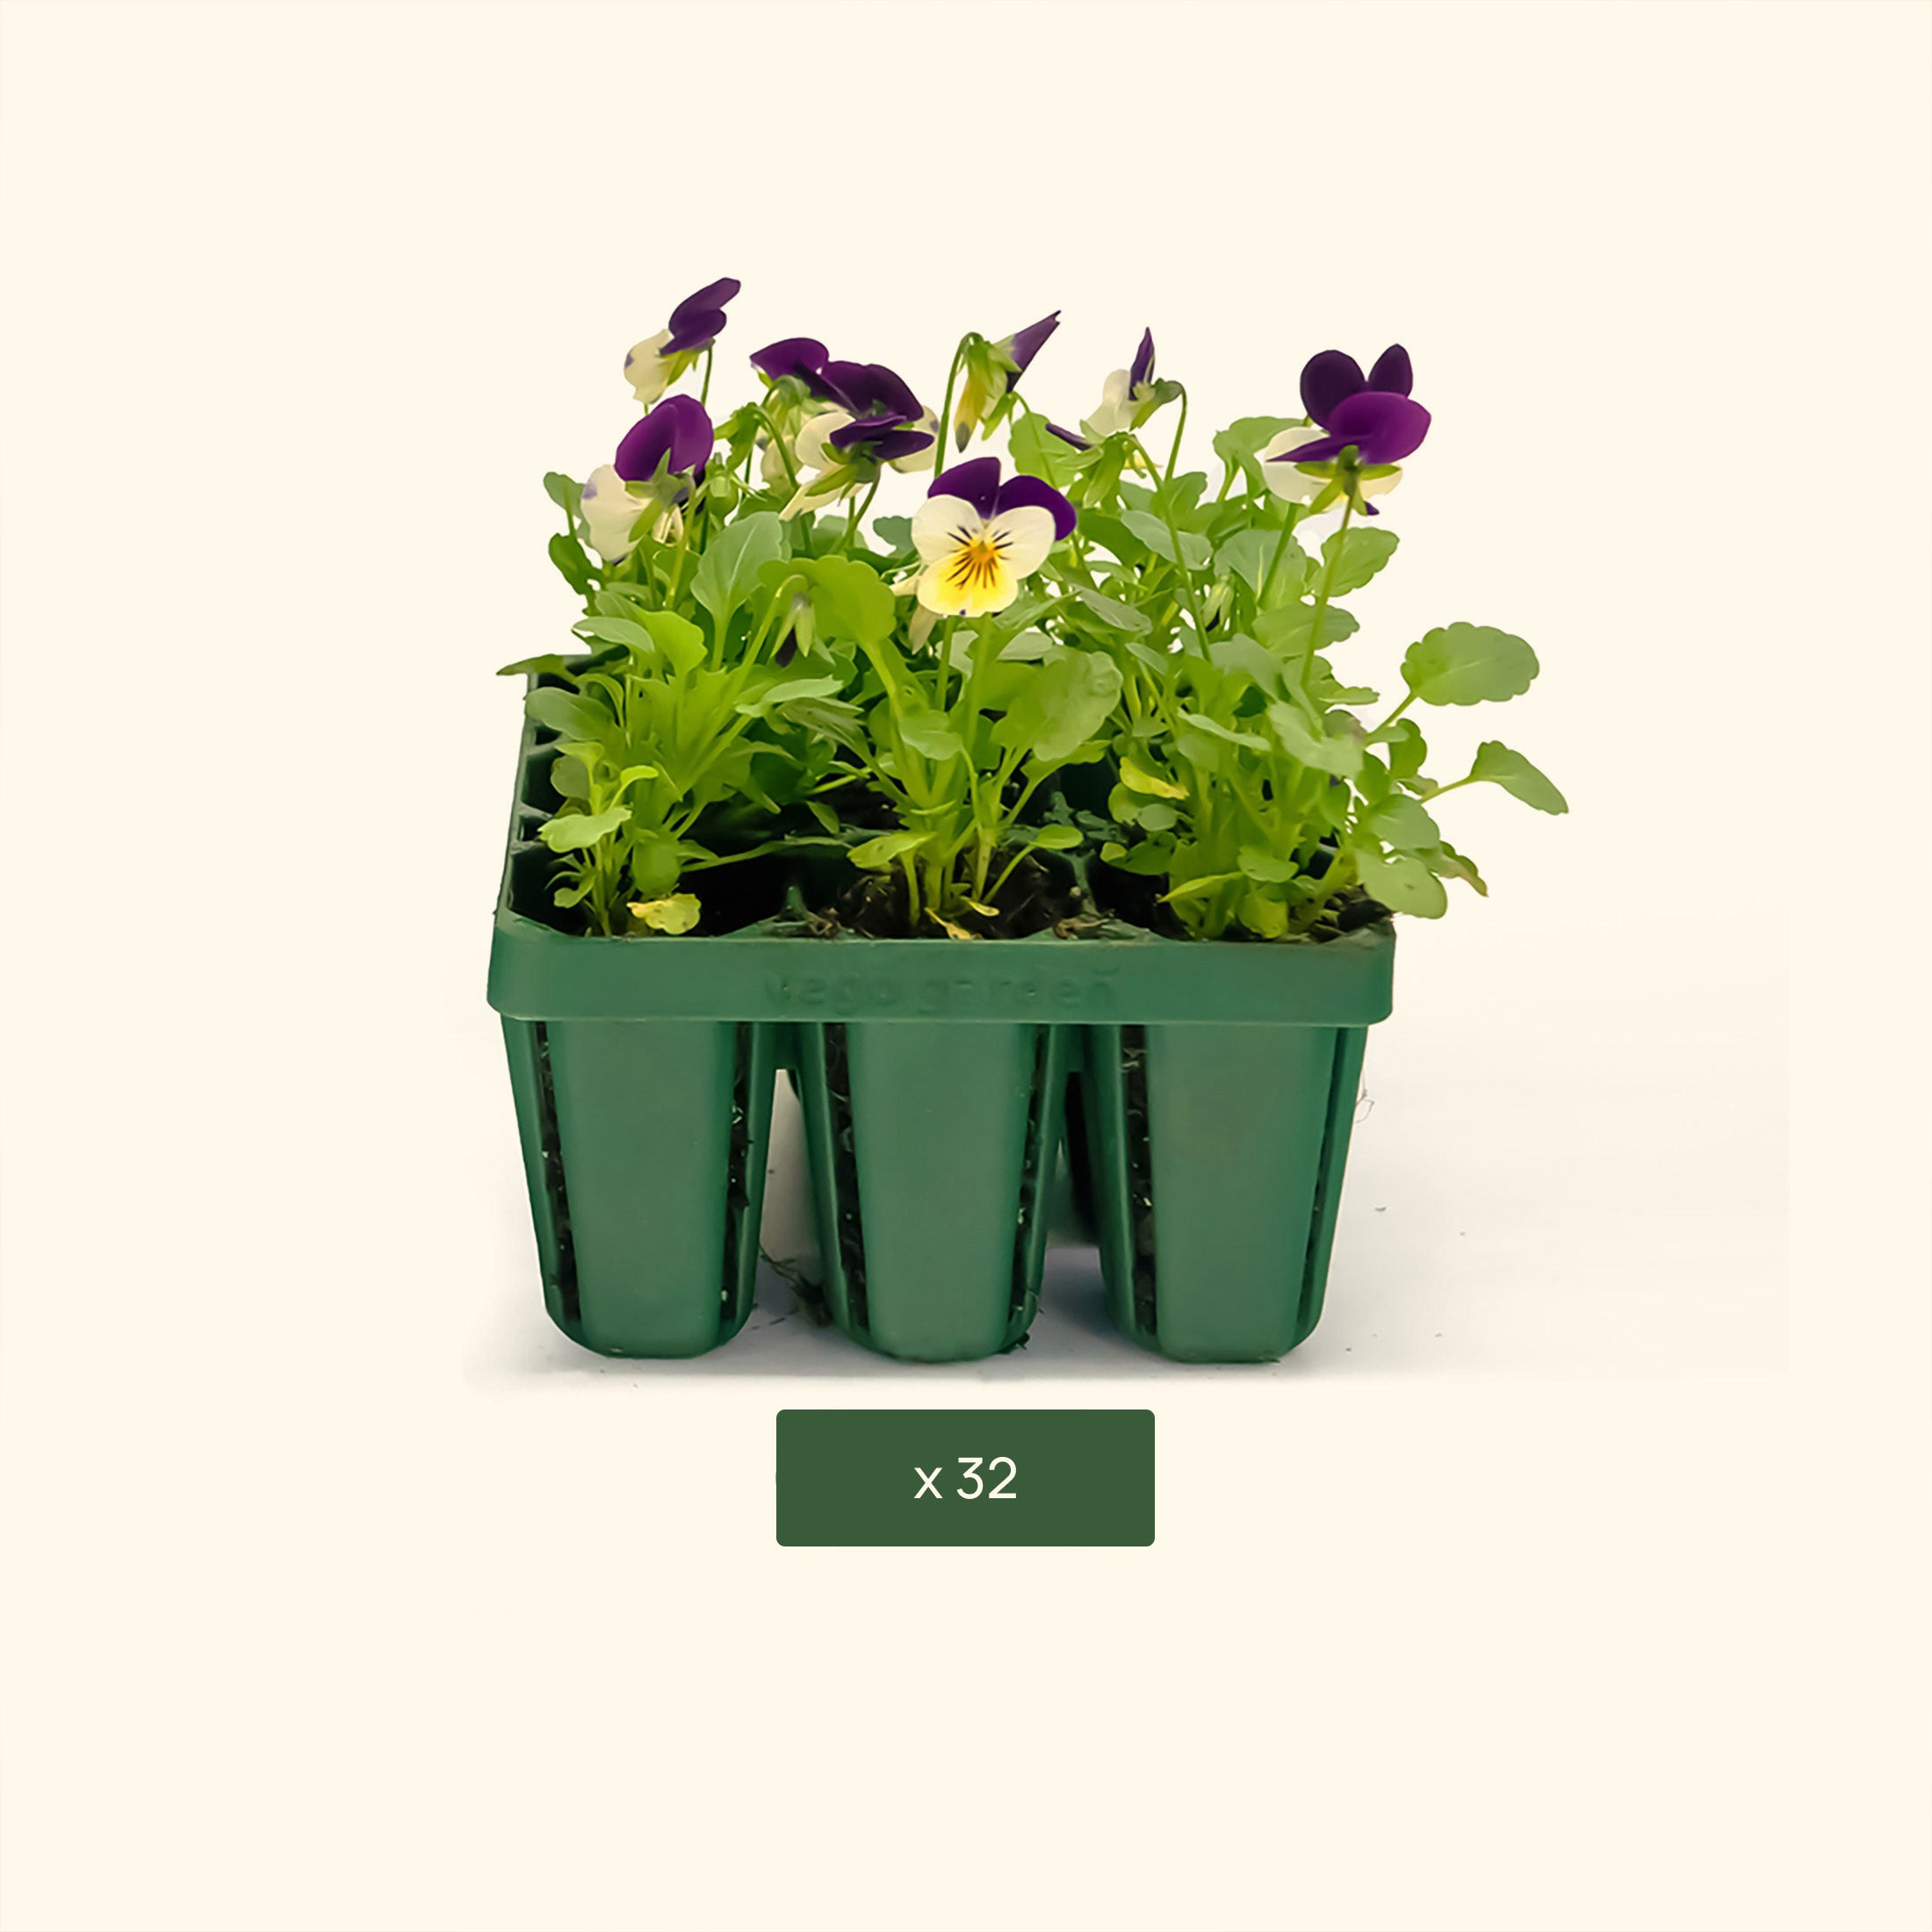 Vego Garden | Seedling Trays with Drip Irrigation & Air Pruning Strips - 32 Pack